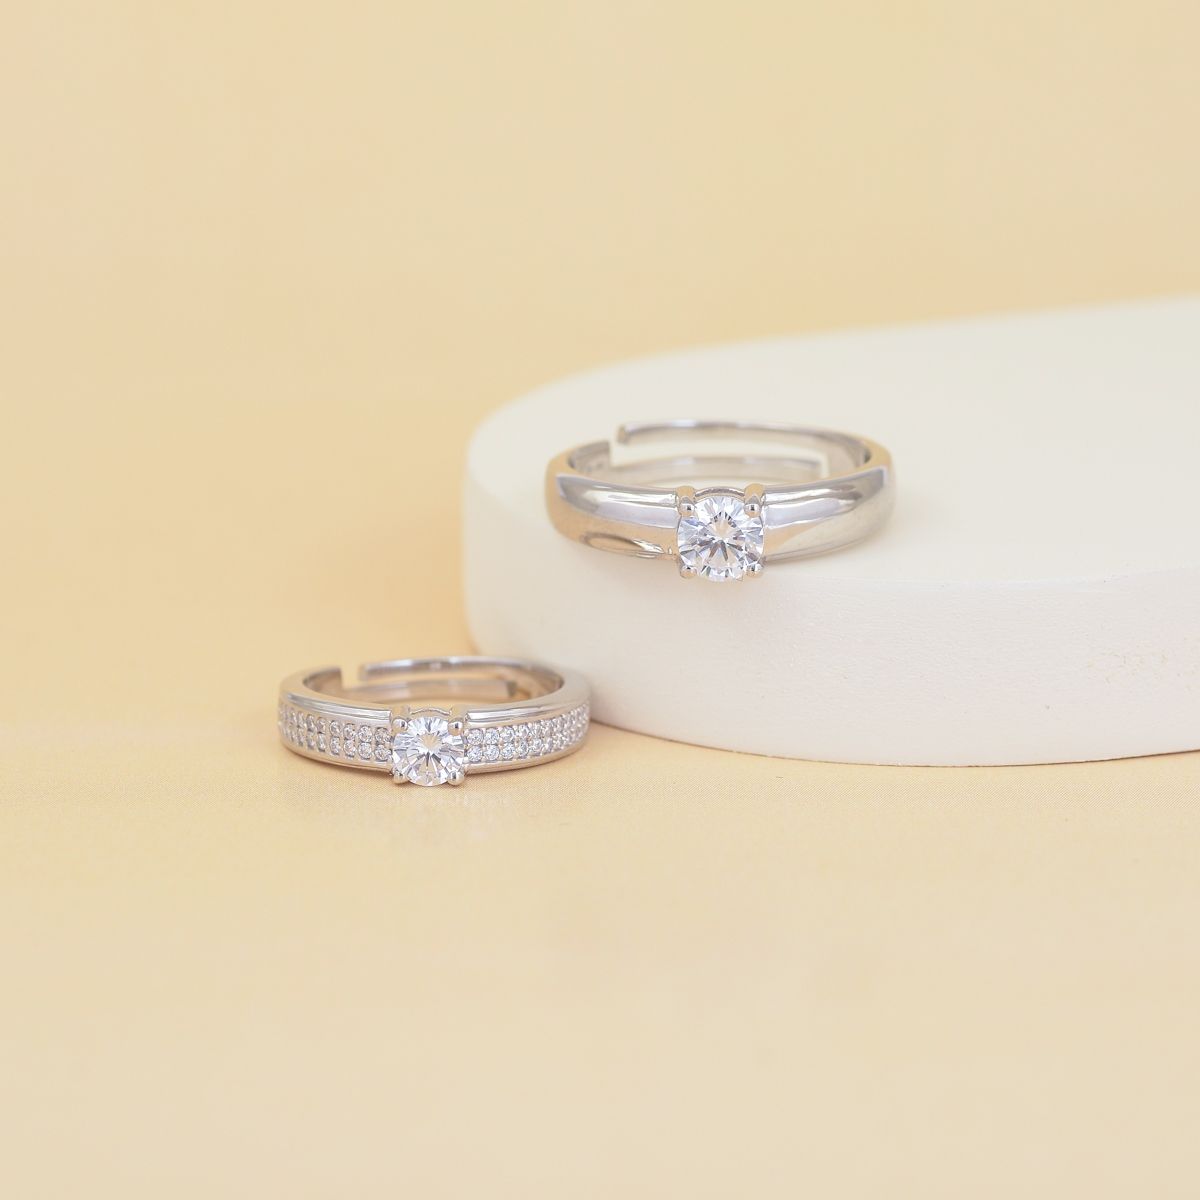 Western Wedding Rings & Bands | Engagement Rings | Hyo Silver